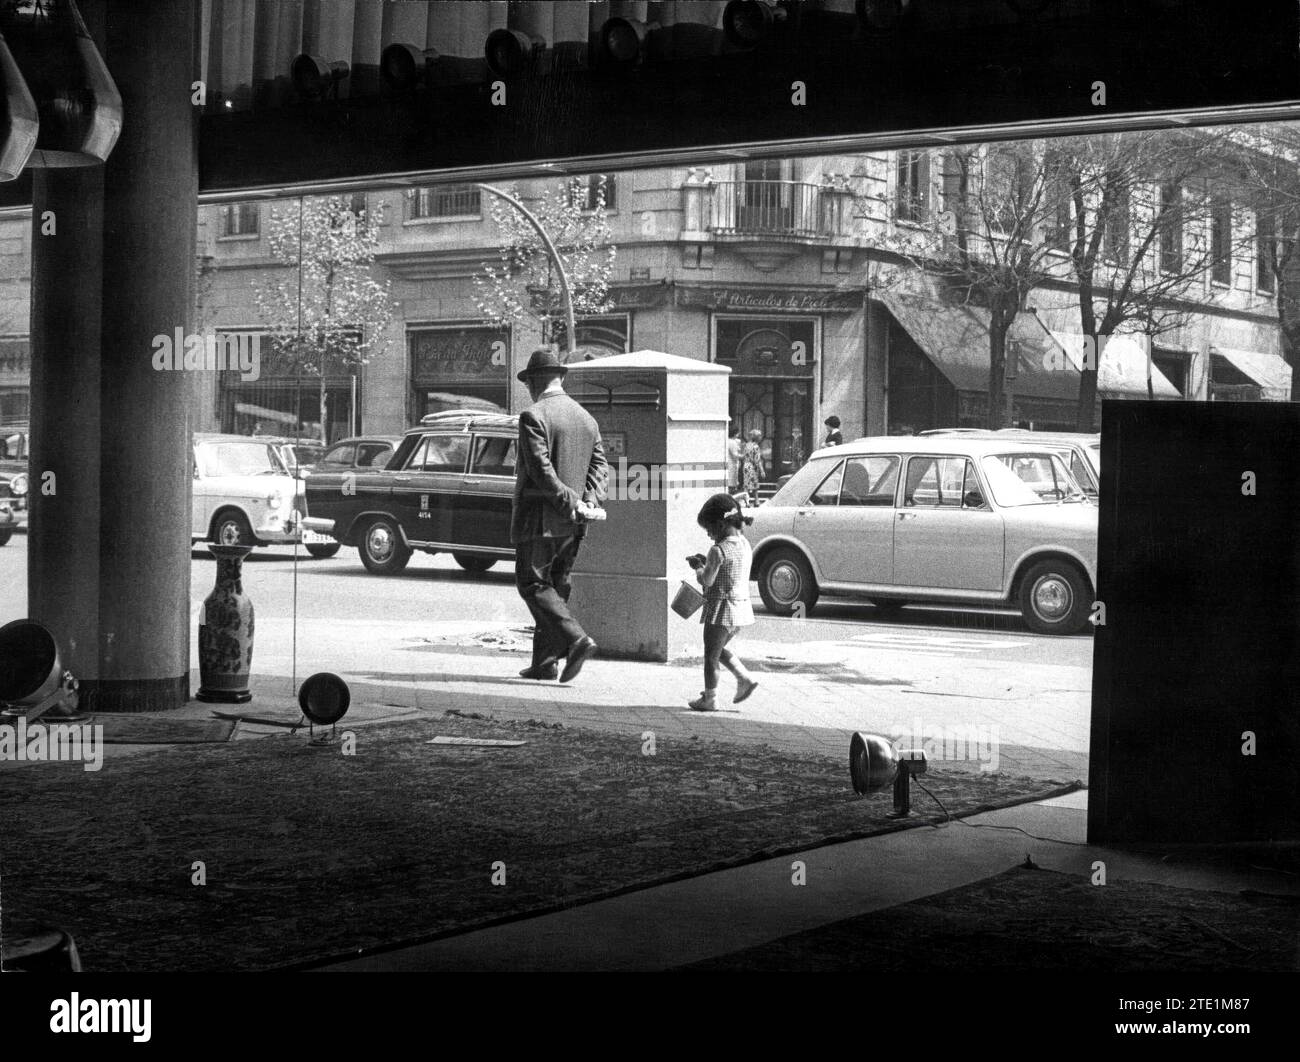 04/01/1970. Madrid, April 1979. Appearance of the intersection of Serrano and Villanueva streets from inside a store. Credit: Album / Archivo ABC / Teodoro Naranjo Domínguez Stock Photo